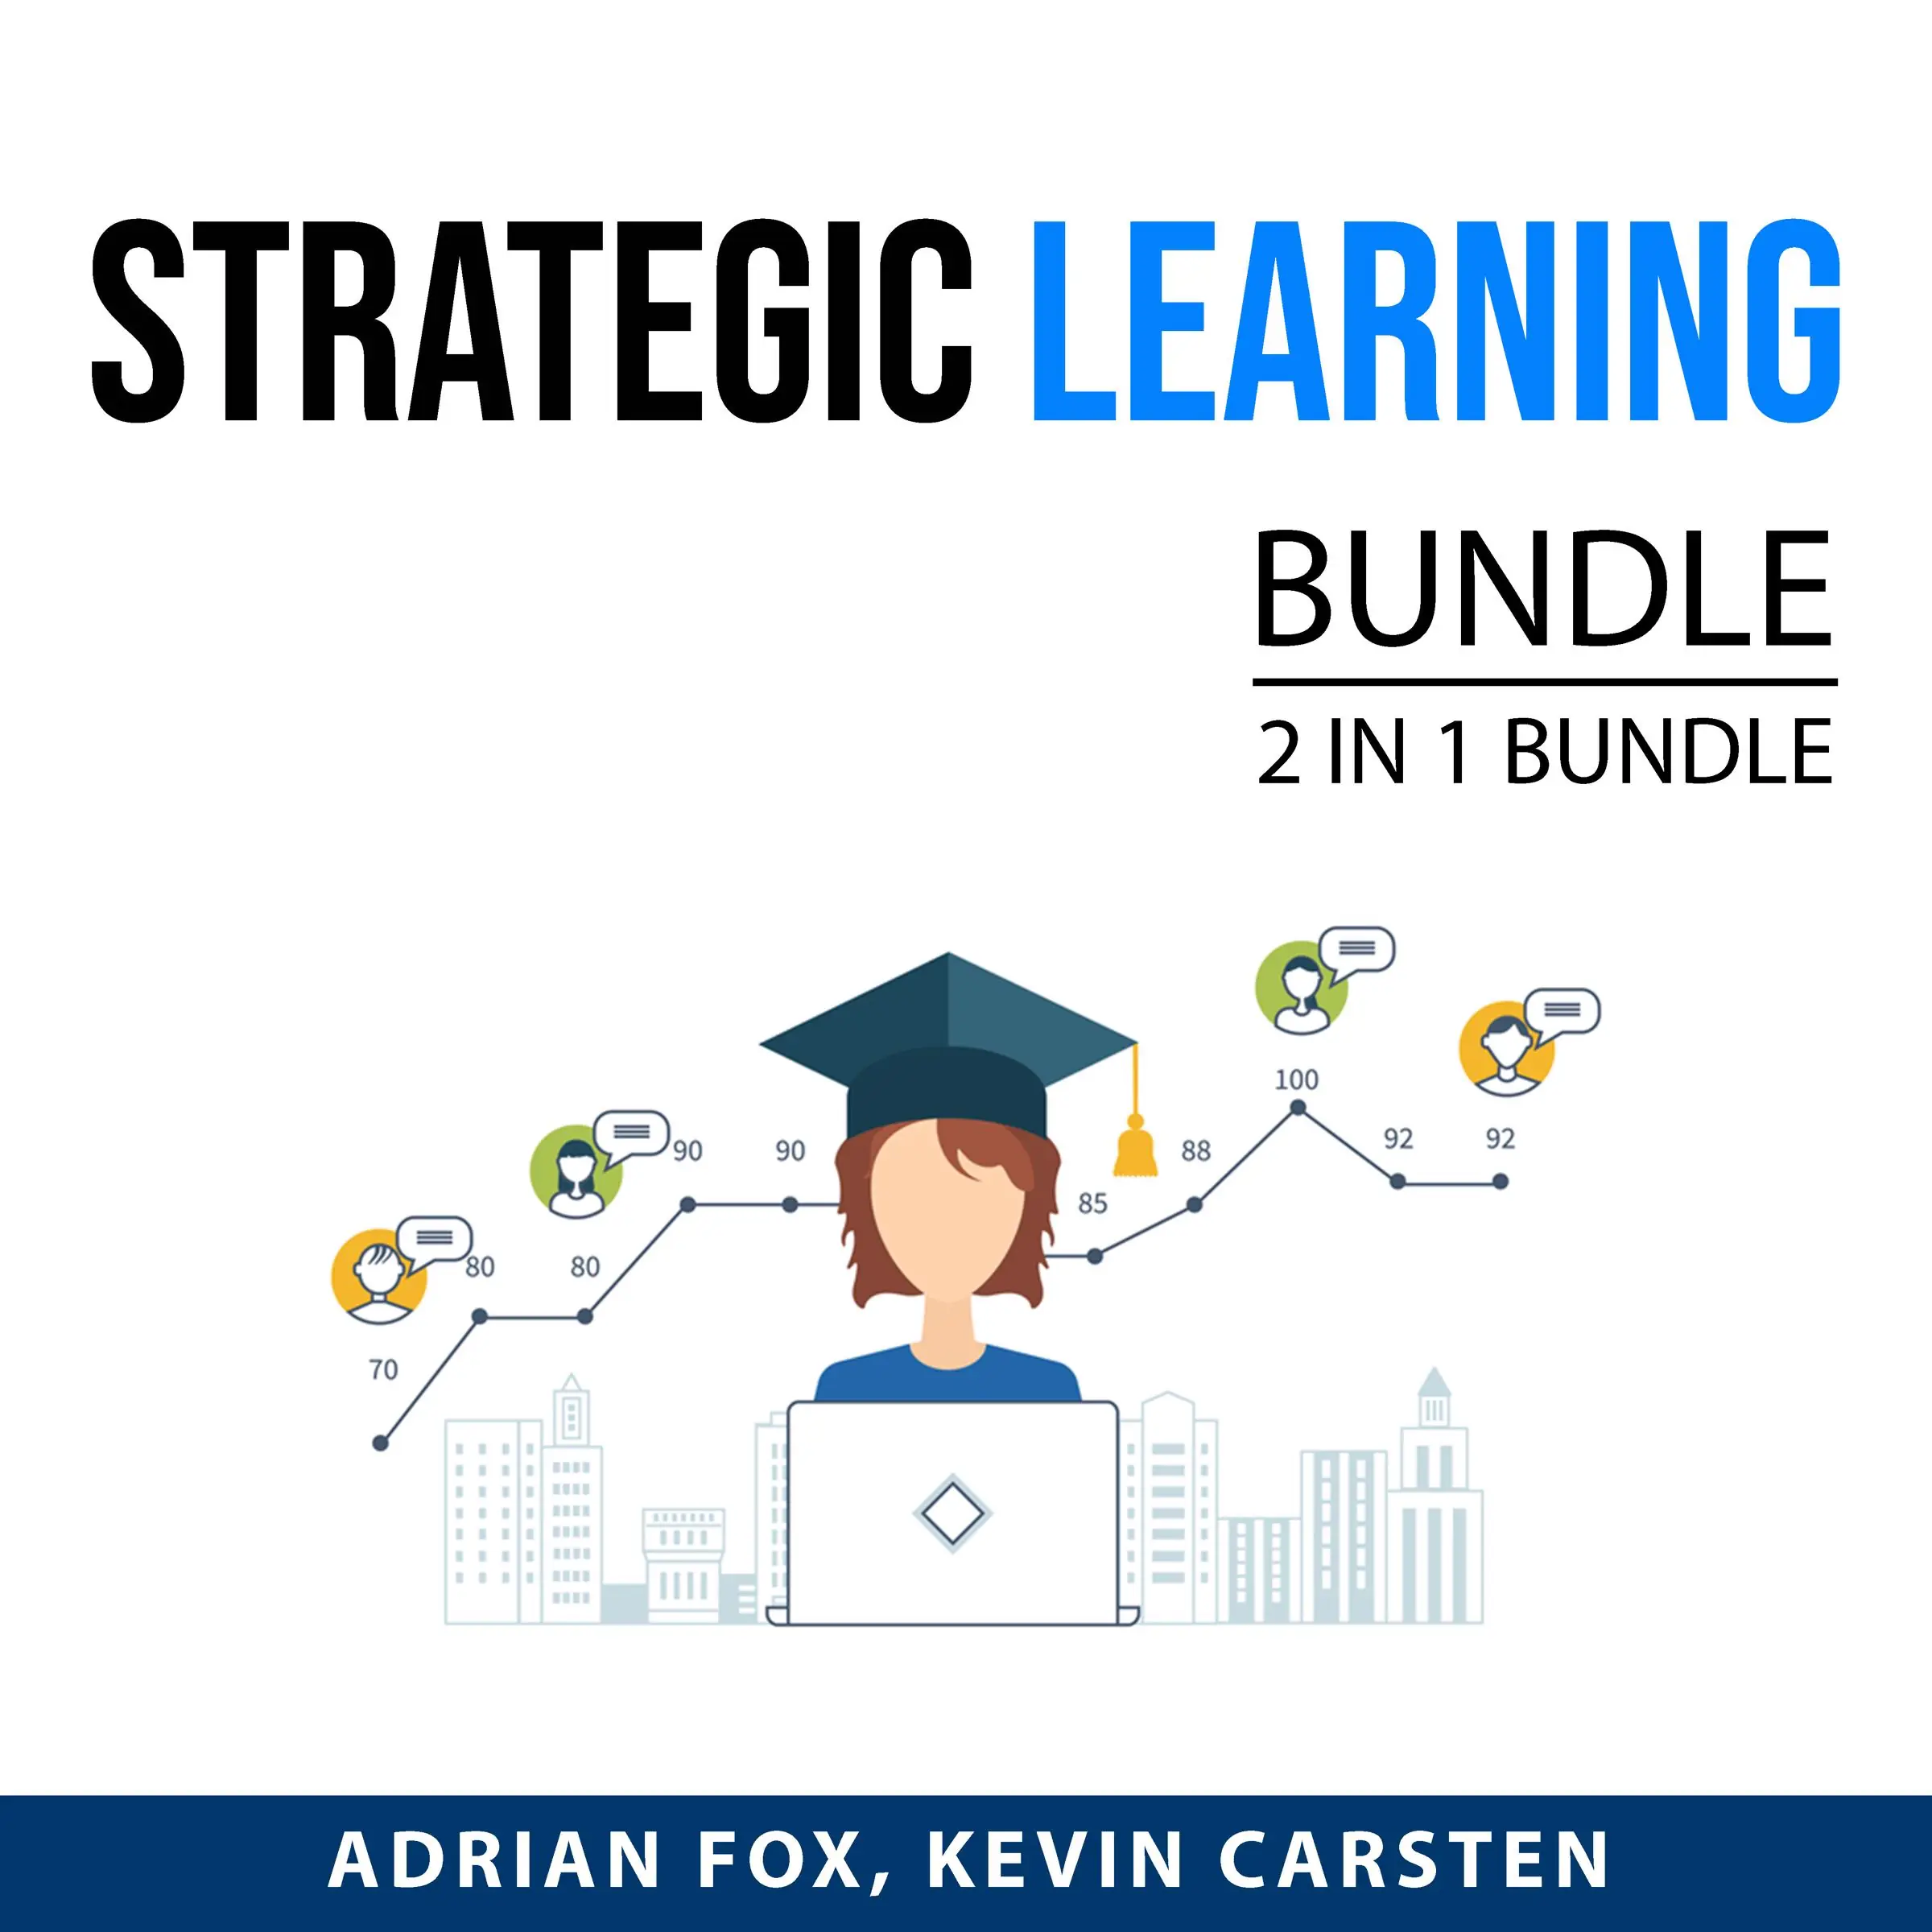 Strategic Learning Bundle, 2 IN 1 Bundle: Learn Like Einstein and Master Student by and Kevin Carsten